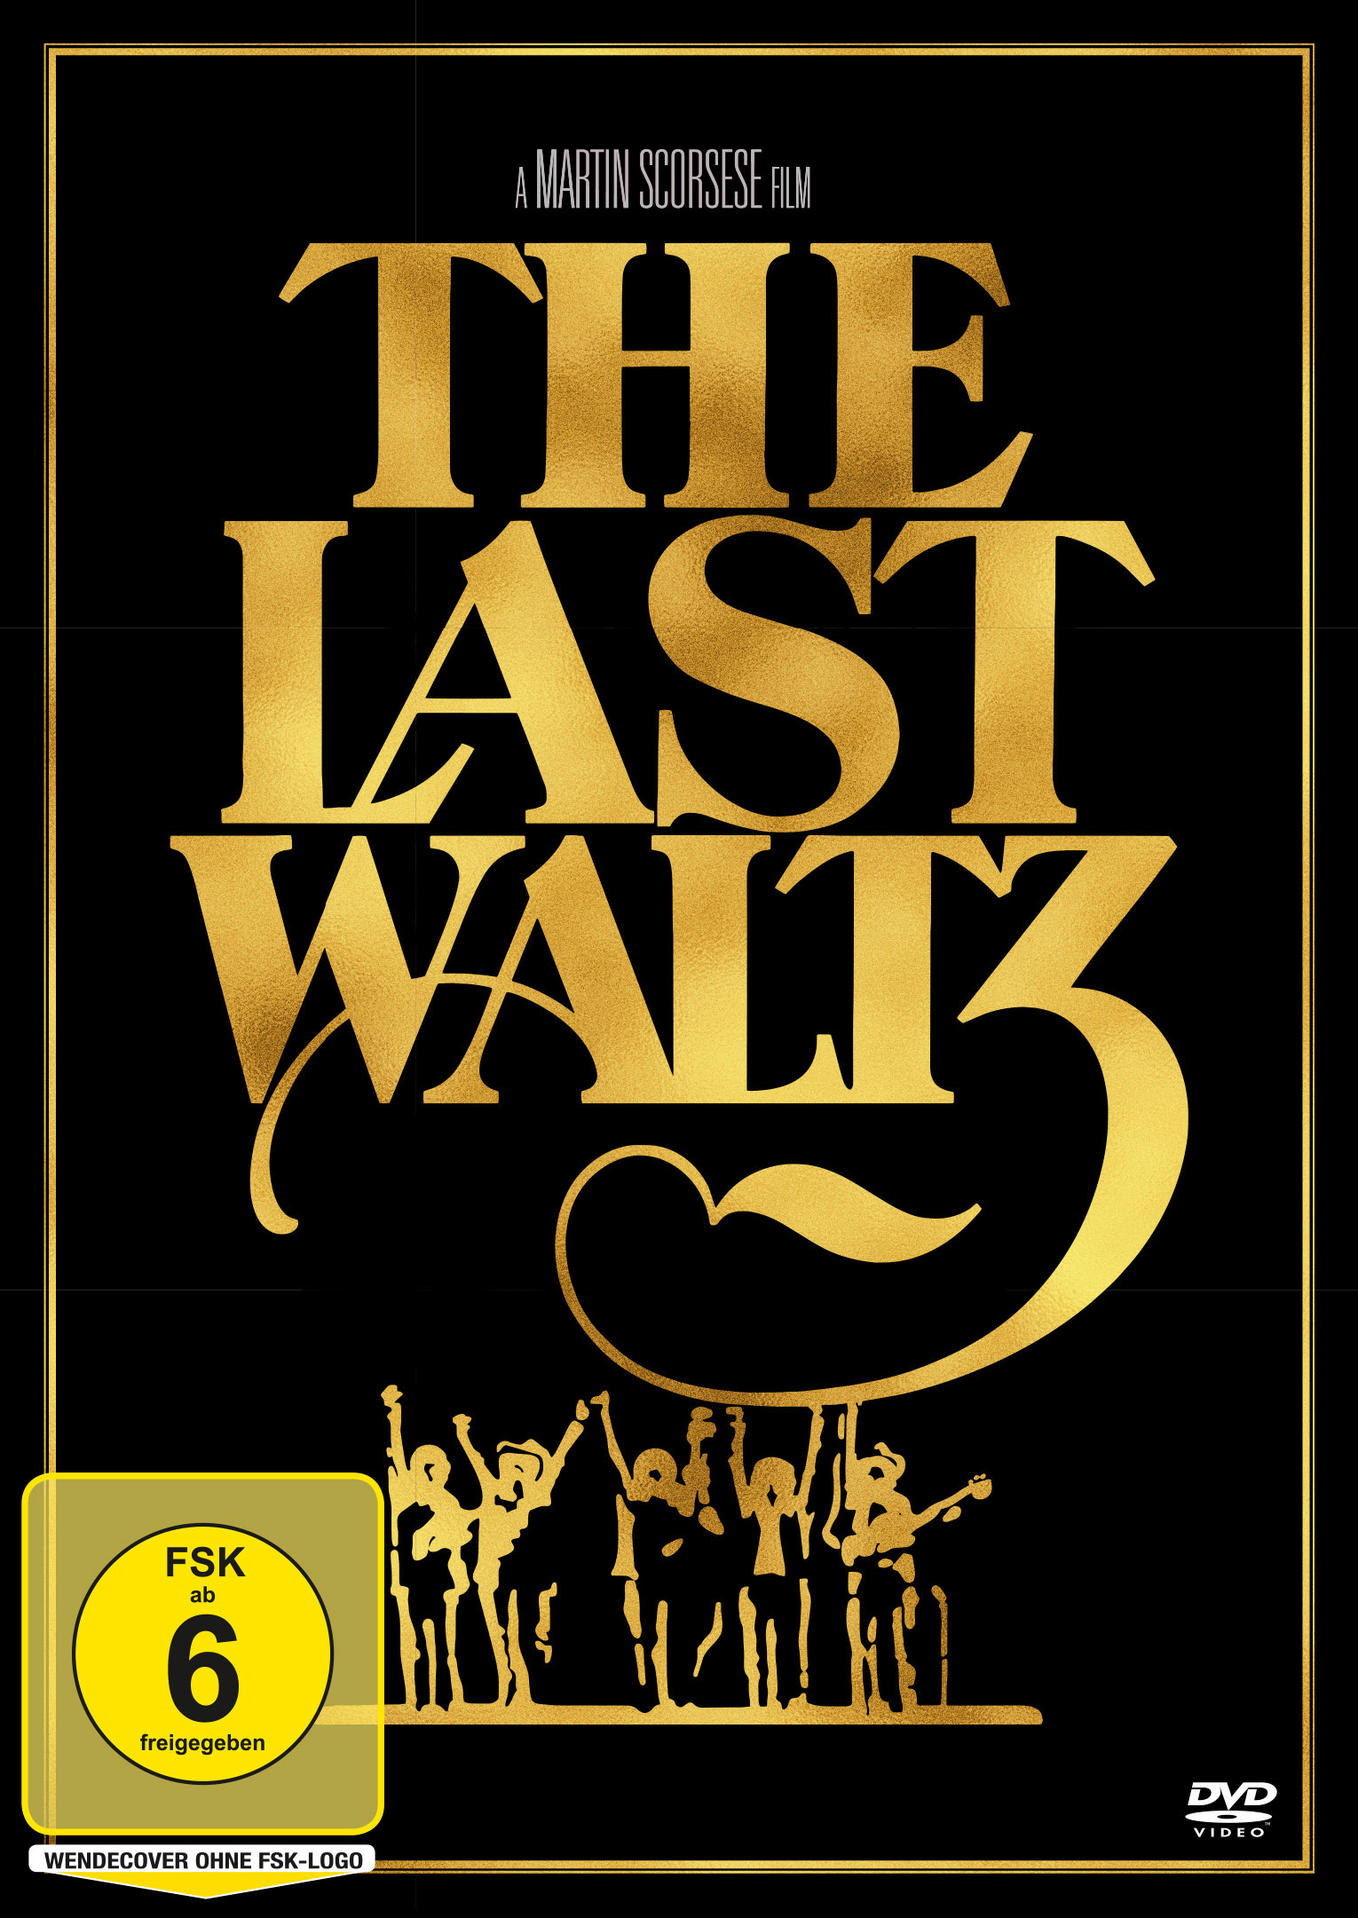 The Band - The Last DVD Waltz